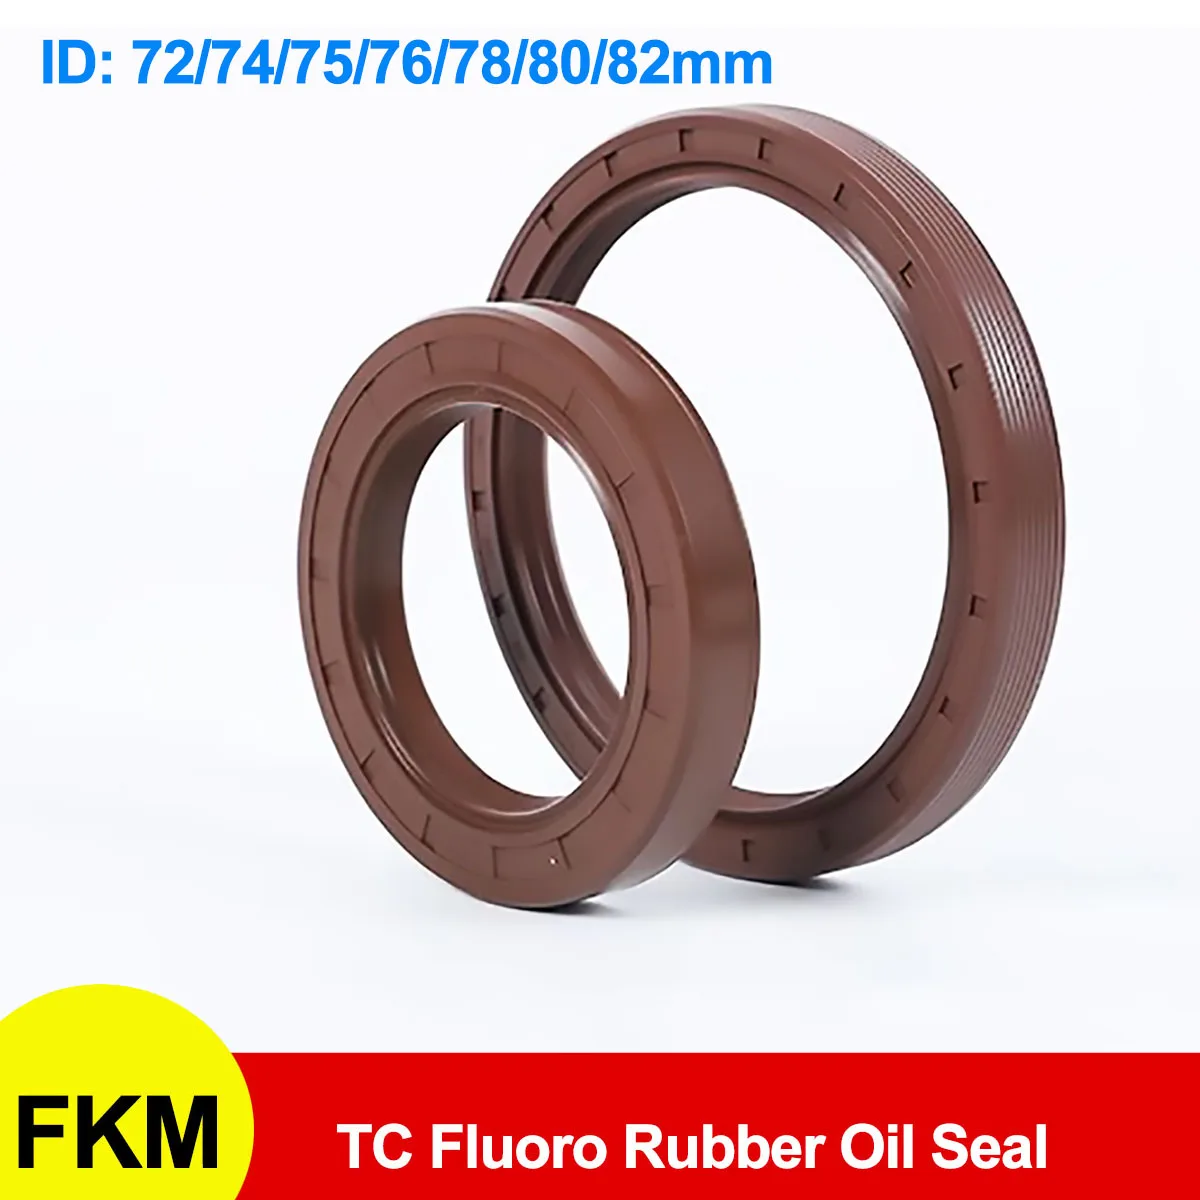 

FKM Framework Oil Seal TC Fluoro Rubber Gasket Rings Cover Double Lip with Spring for Bearing Shaft ID 72/74/75/76/78/80/82mm